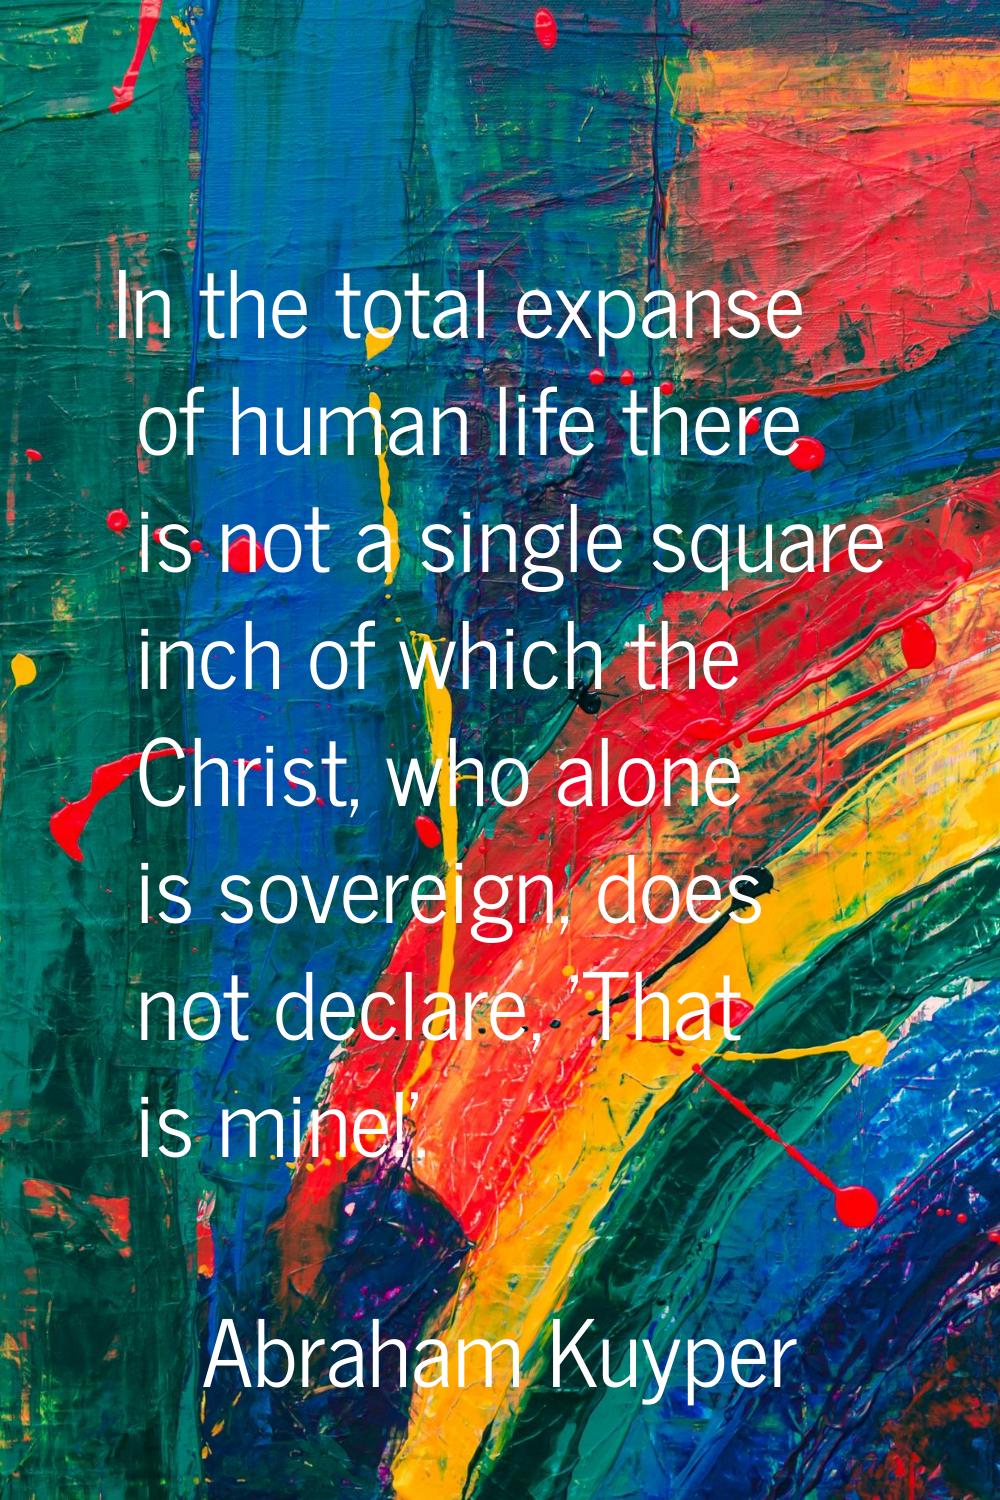 In the total expanse of human life there is not a single square inch of which the Christ, who alone